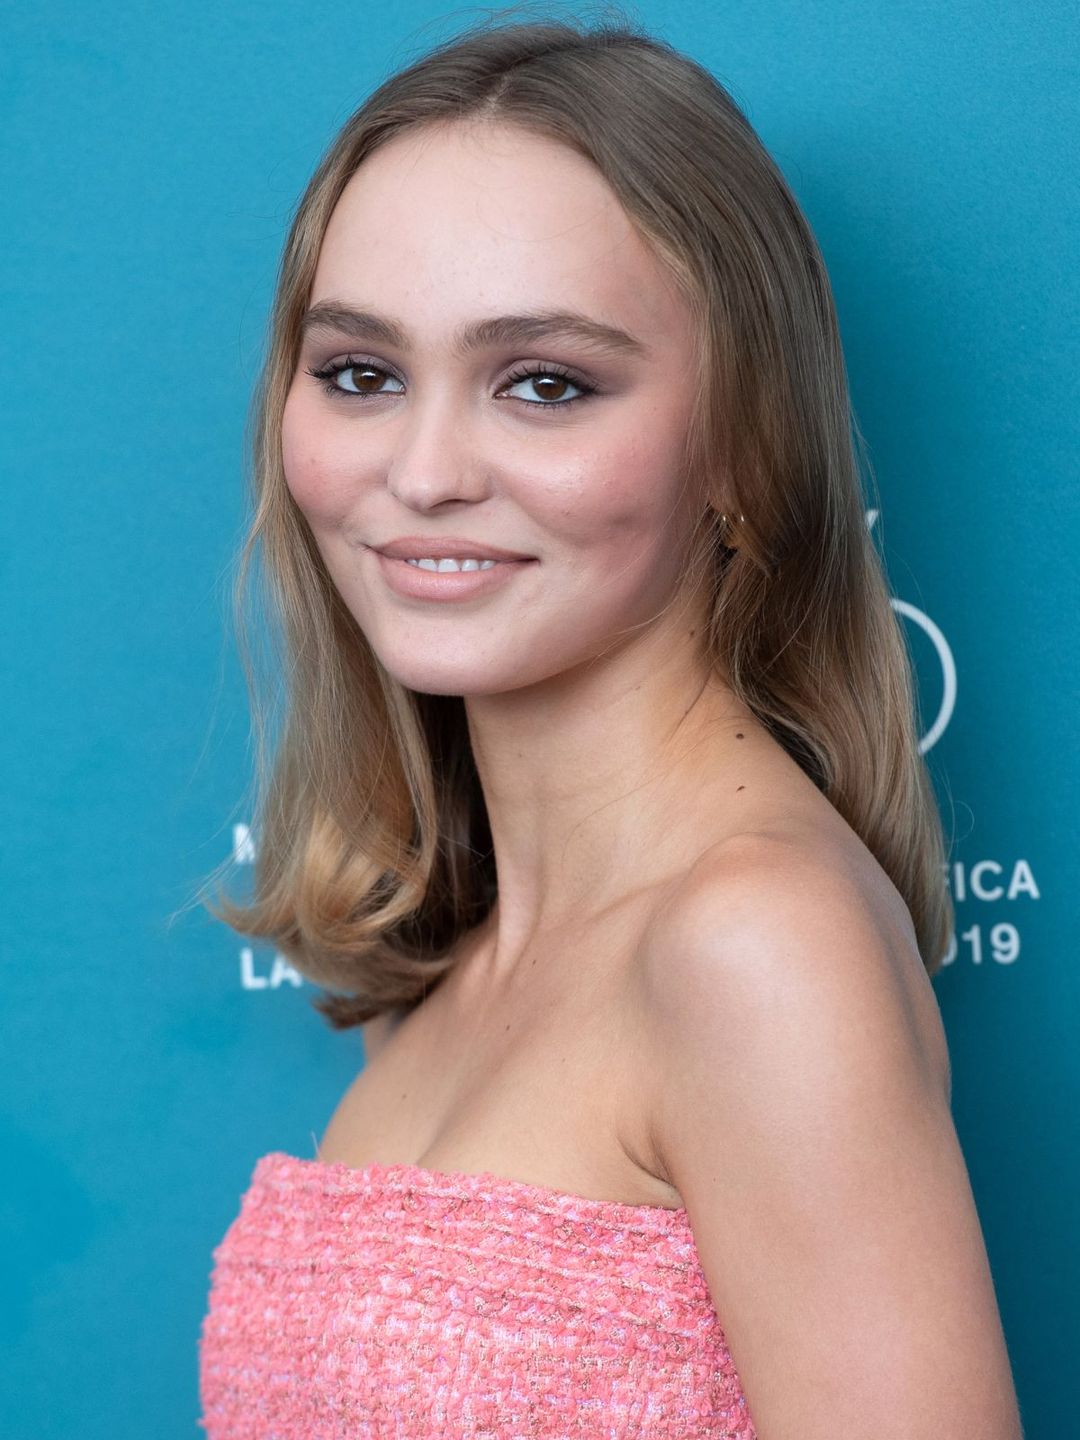 Lily-Rose Melody Depp her zodiac sign